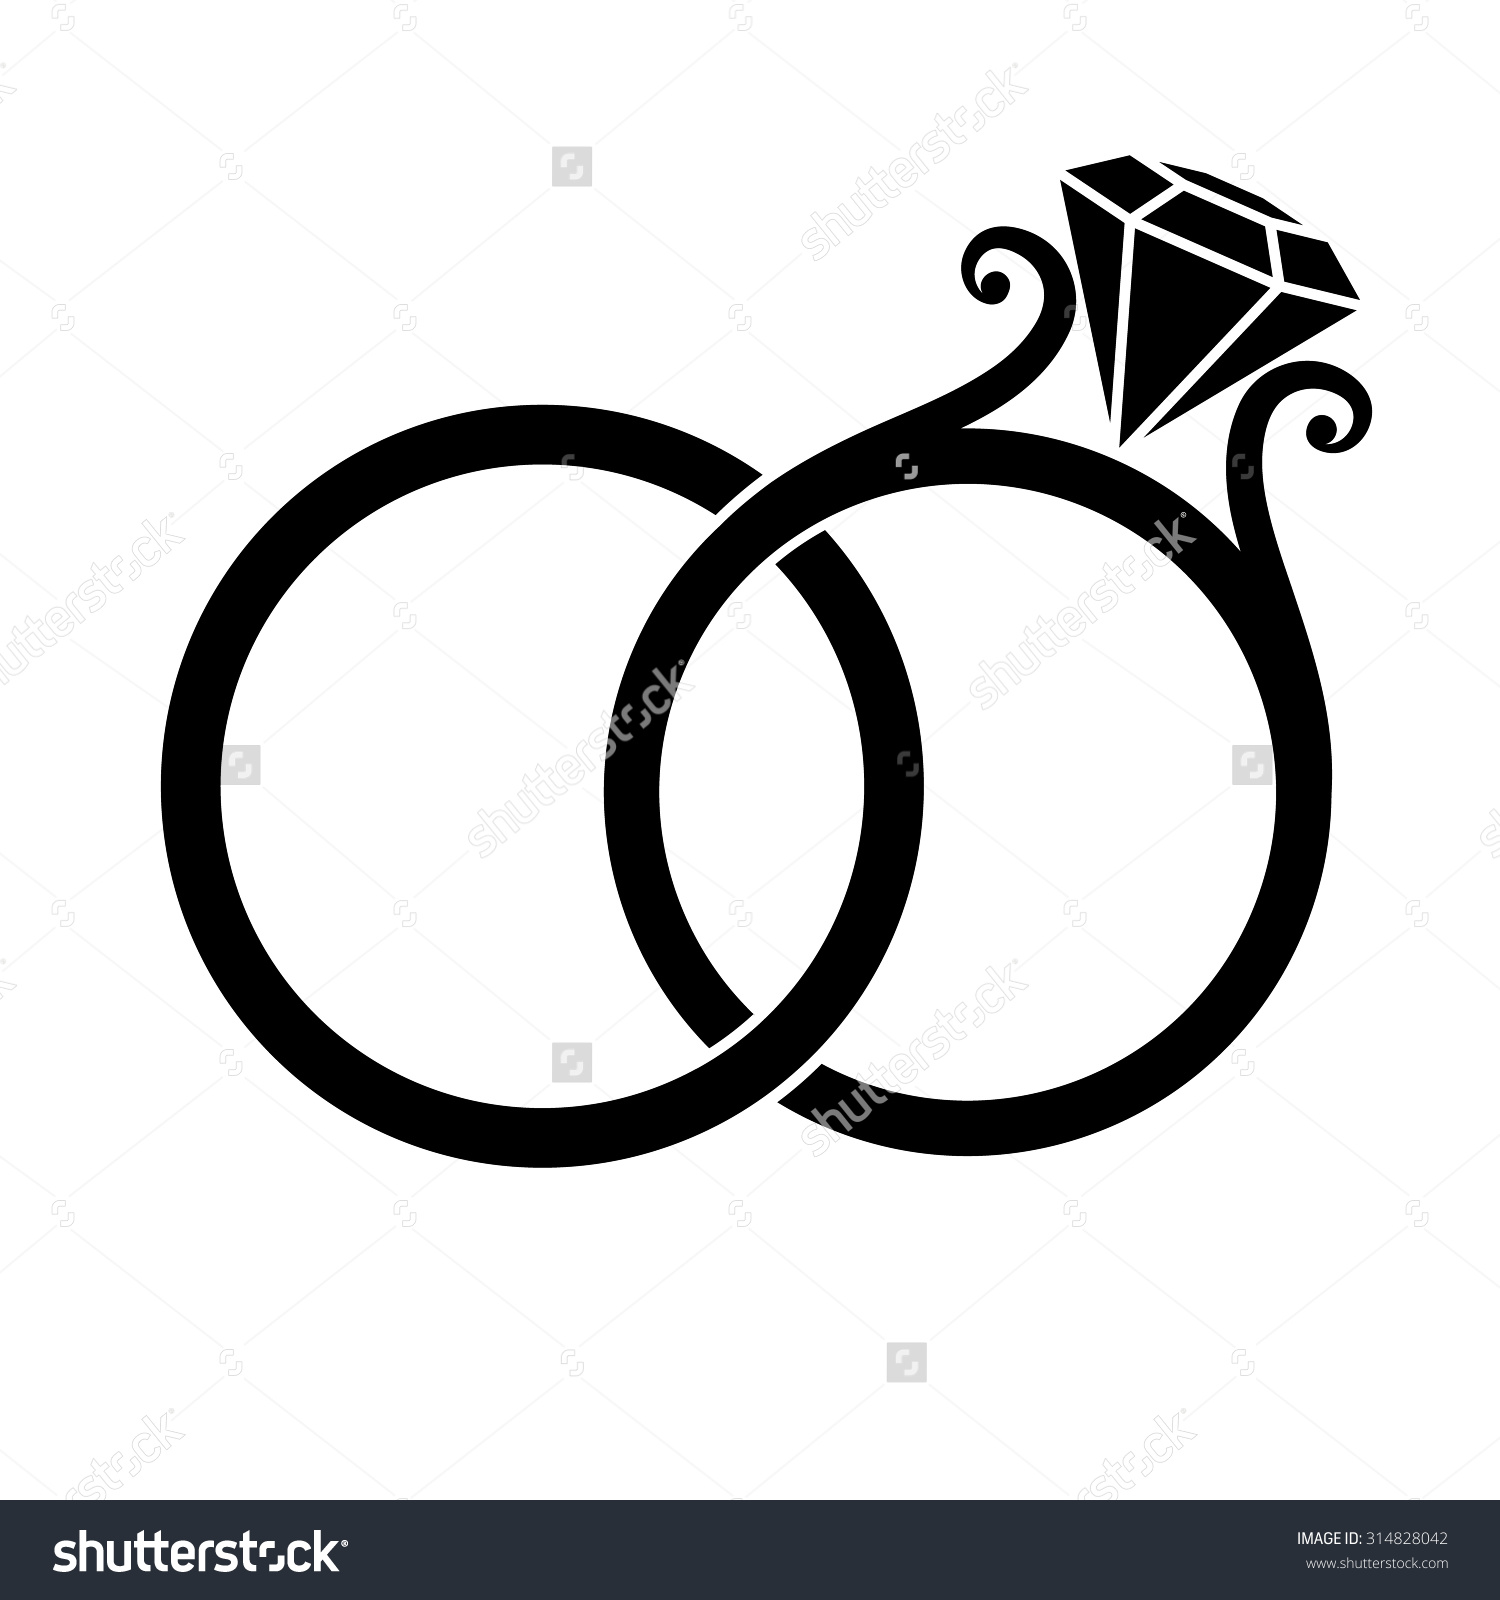 Save to a lightbox - Wedding Rings Clipart